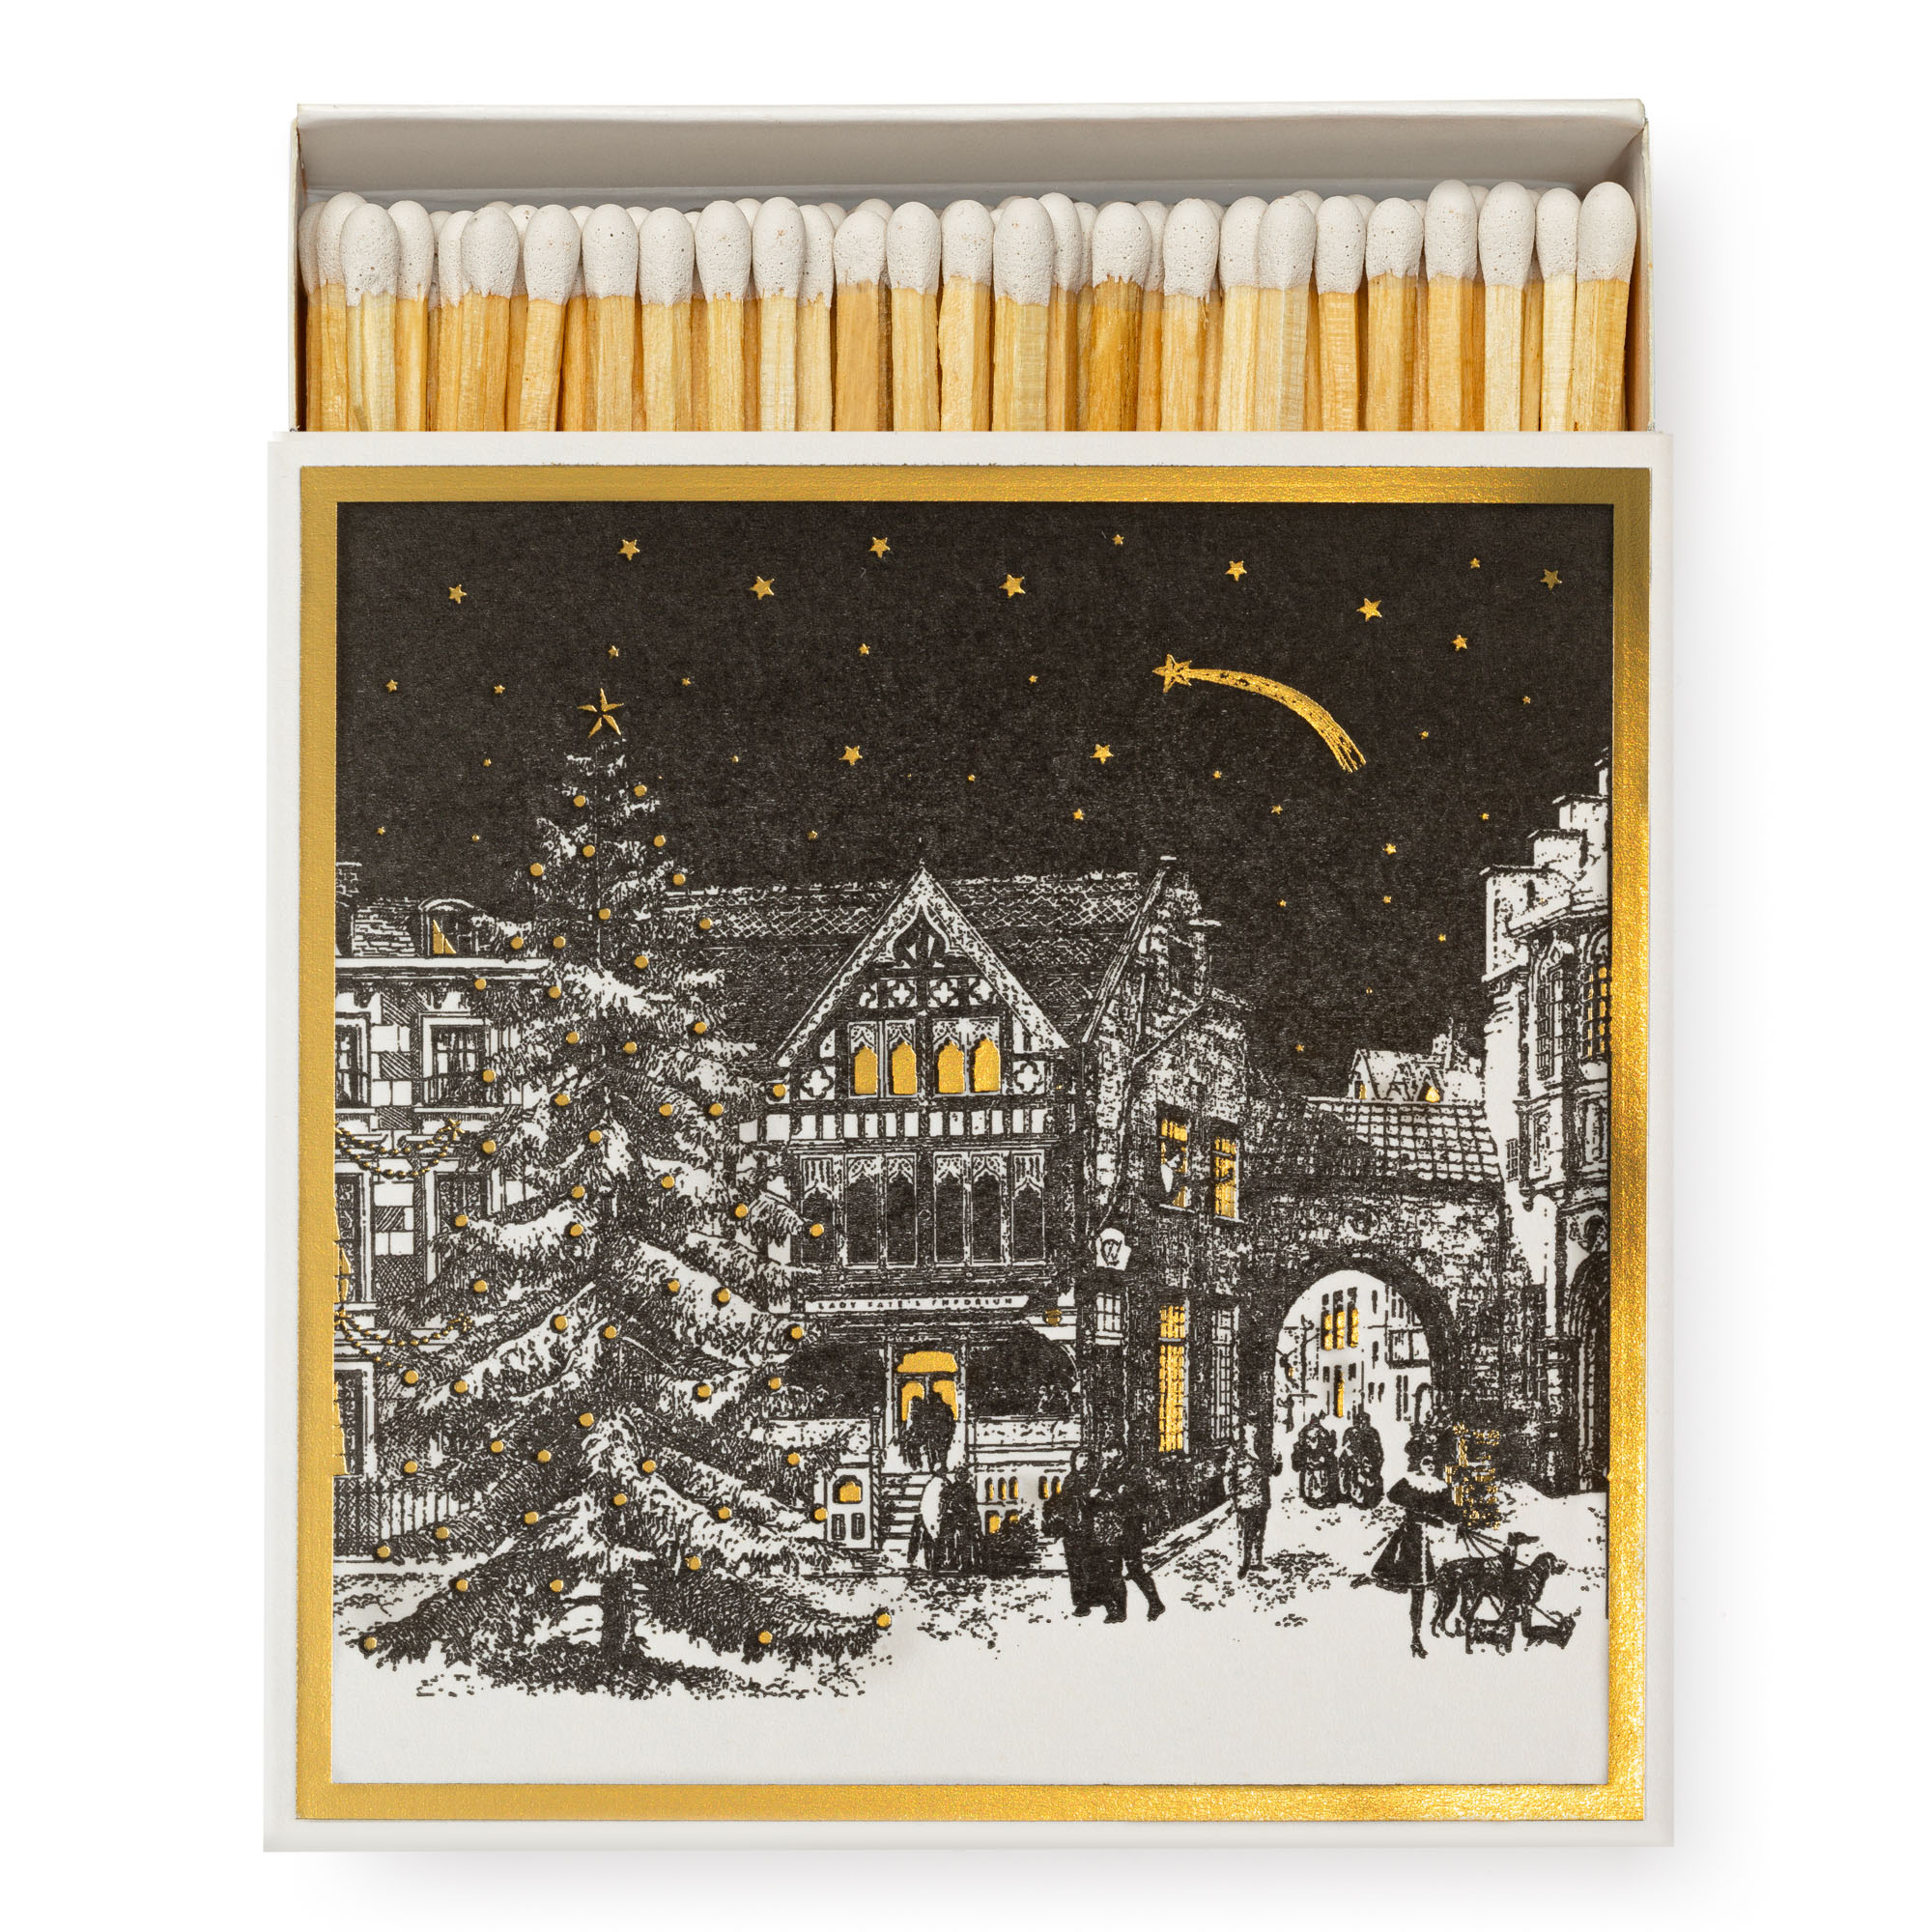 Starry Night - Square Matchboxes - from Archivist Gallery 